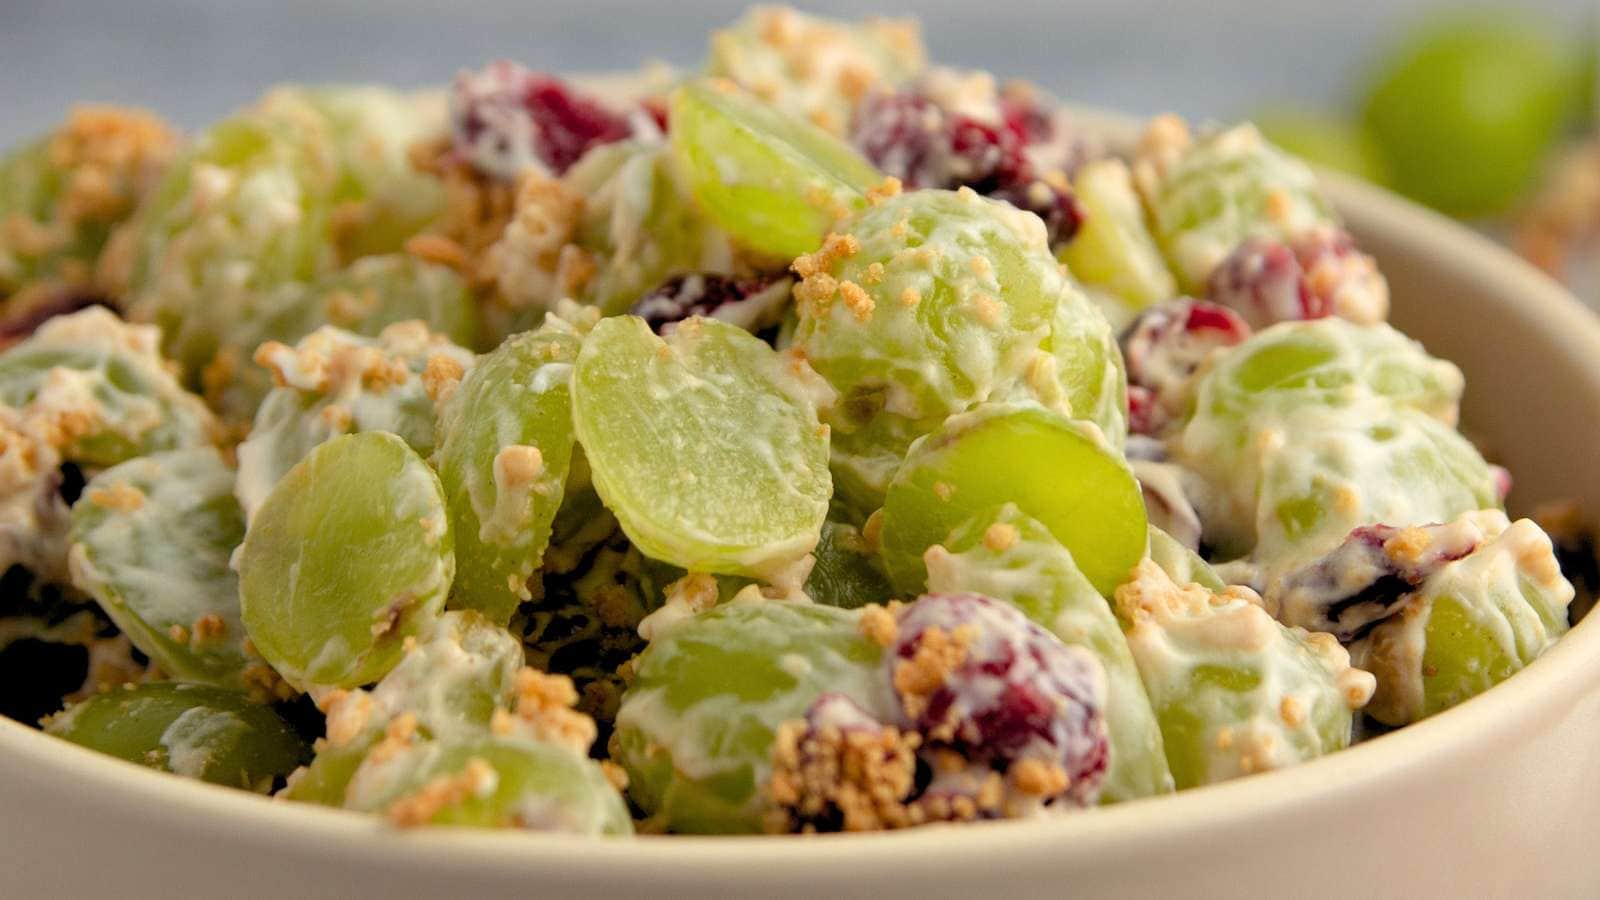 Grape Salad recipe by Cheerful Cook.